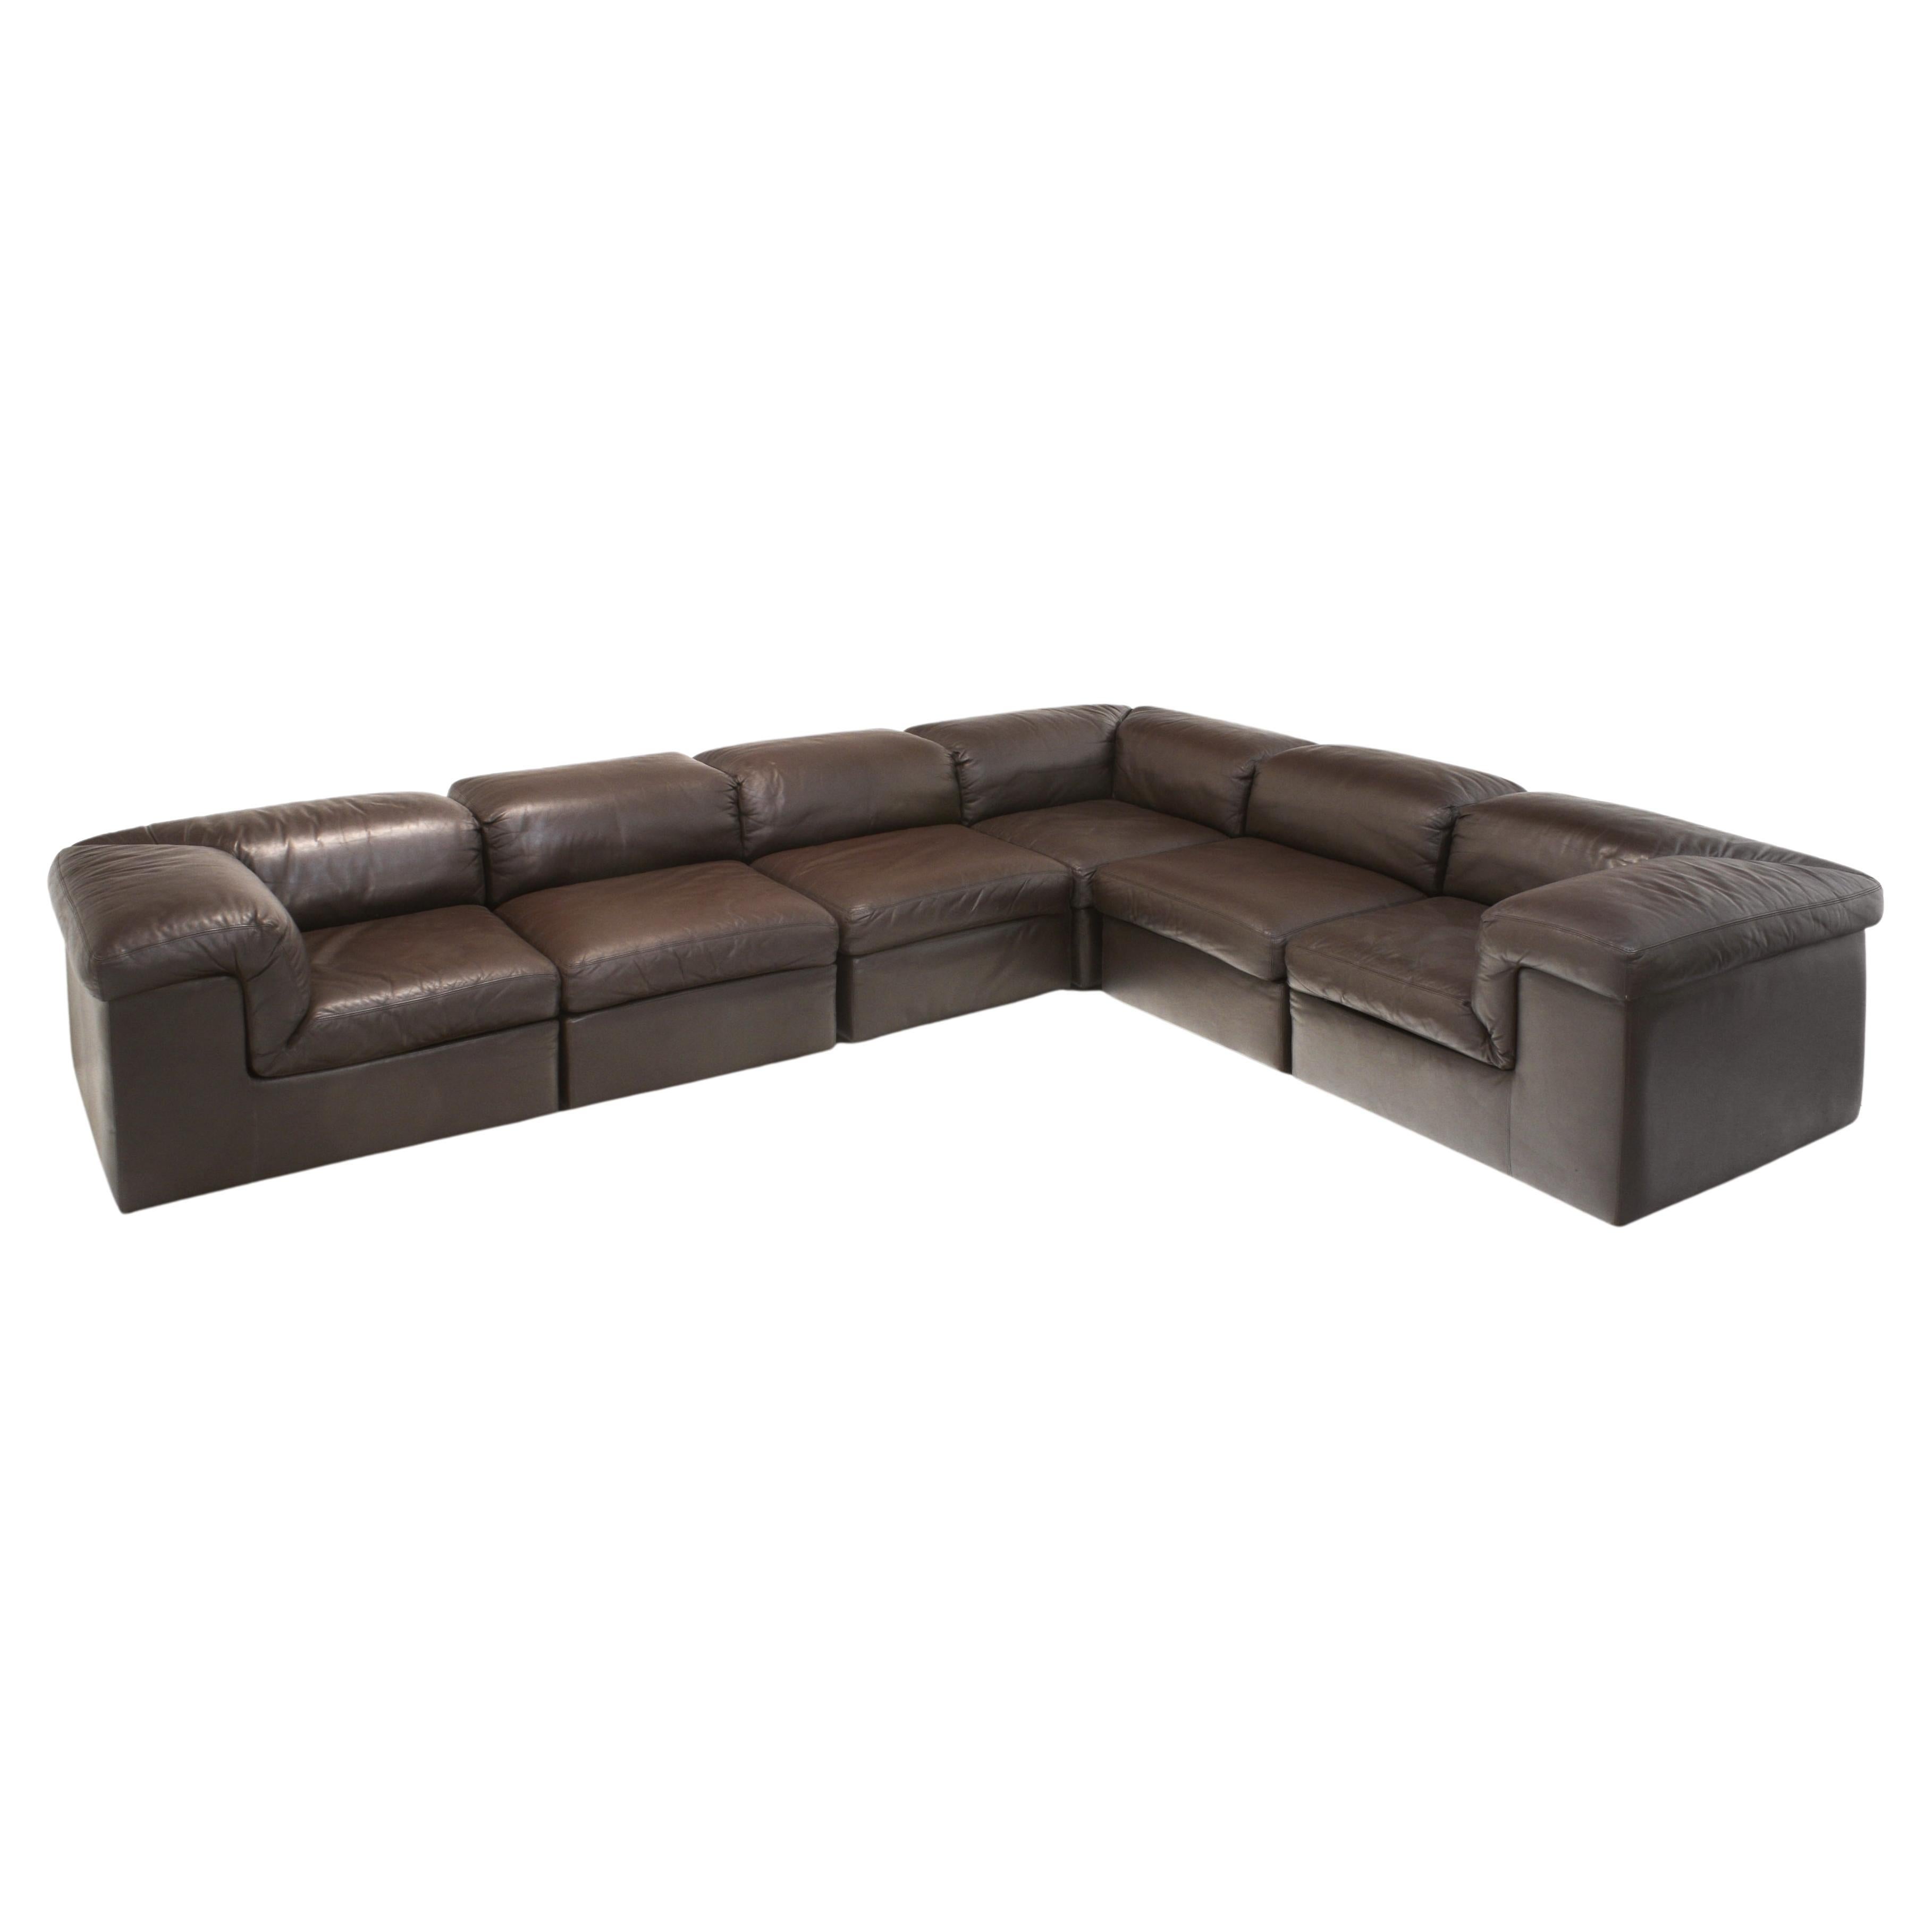 Modular Brown Leather Jeep Sectional Sofa by Anita Schmidt for Durlet,  1970s For Sale at 1stDibs